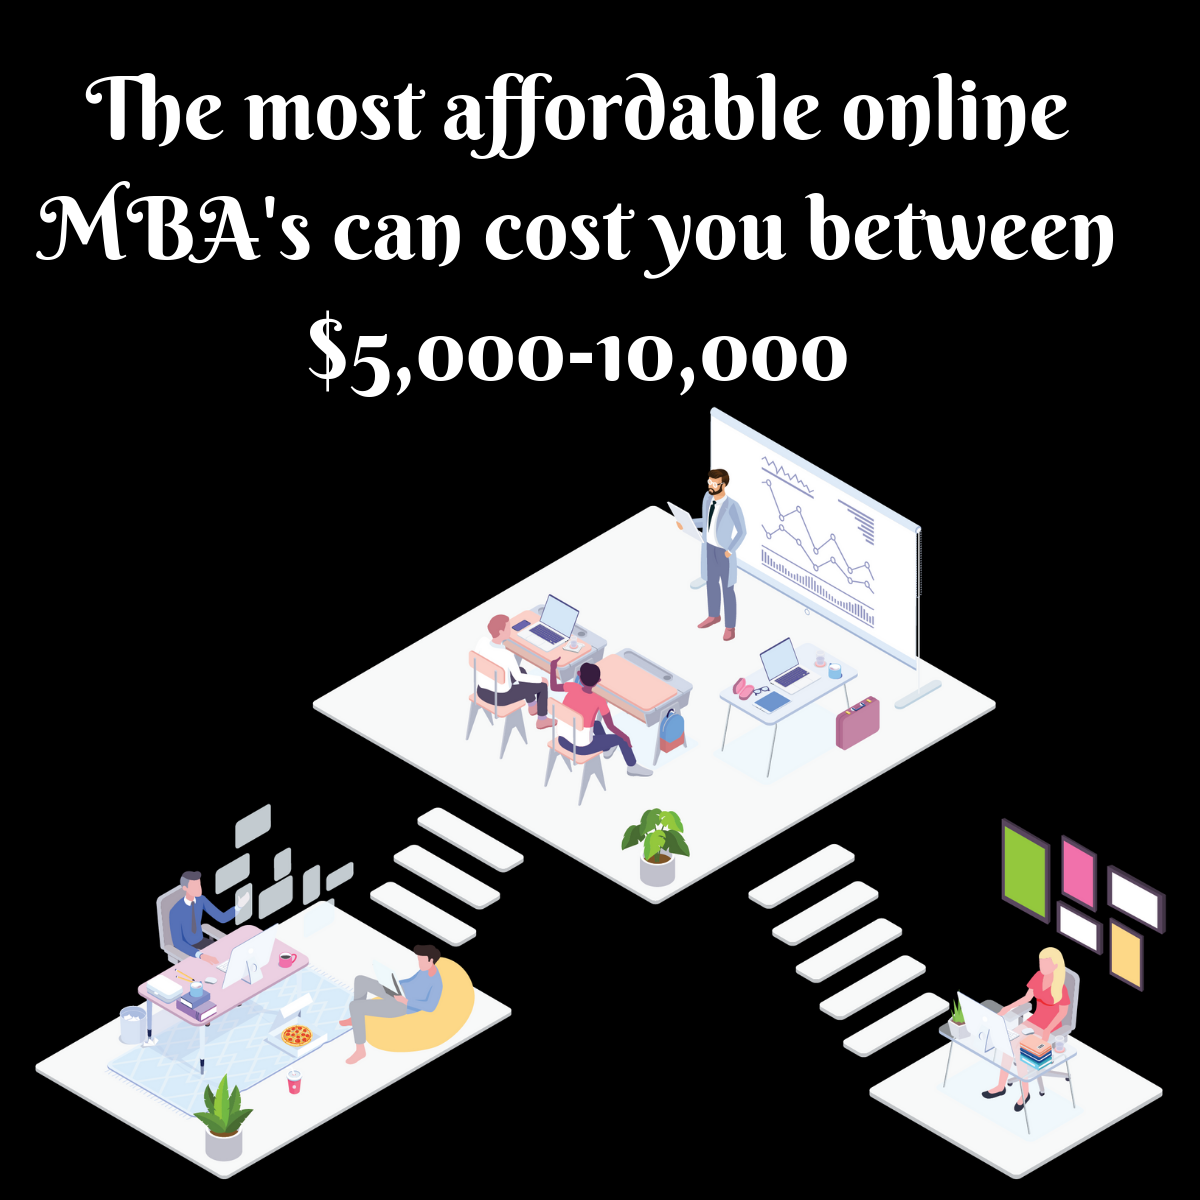 the most affordable online MBA's can cost you between $5,000-10,000